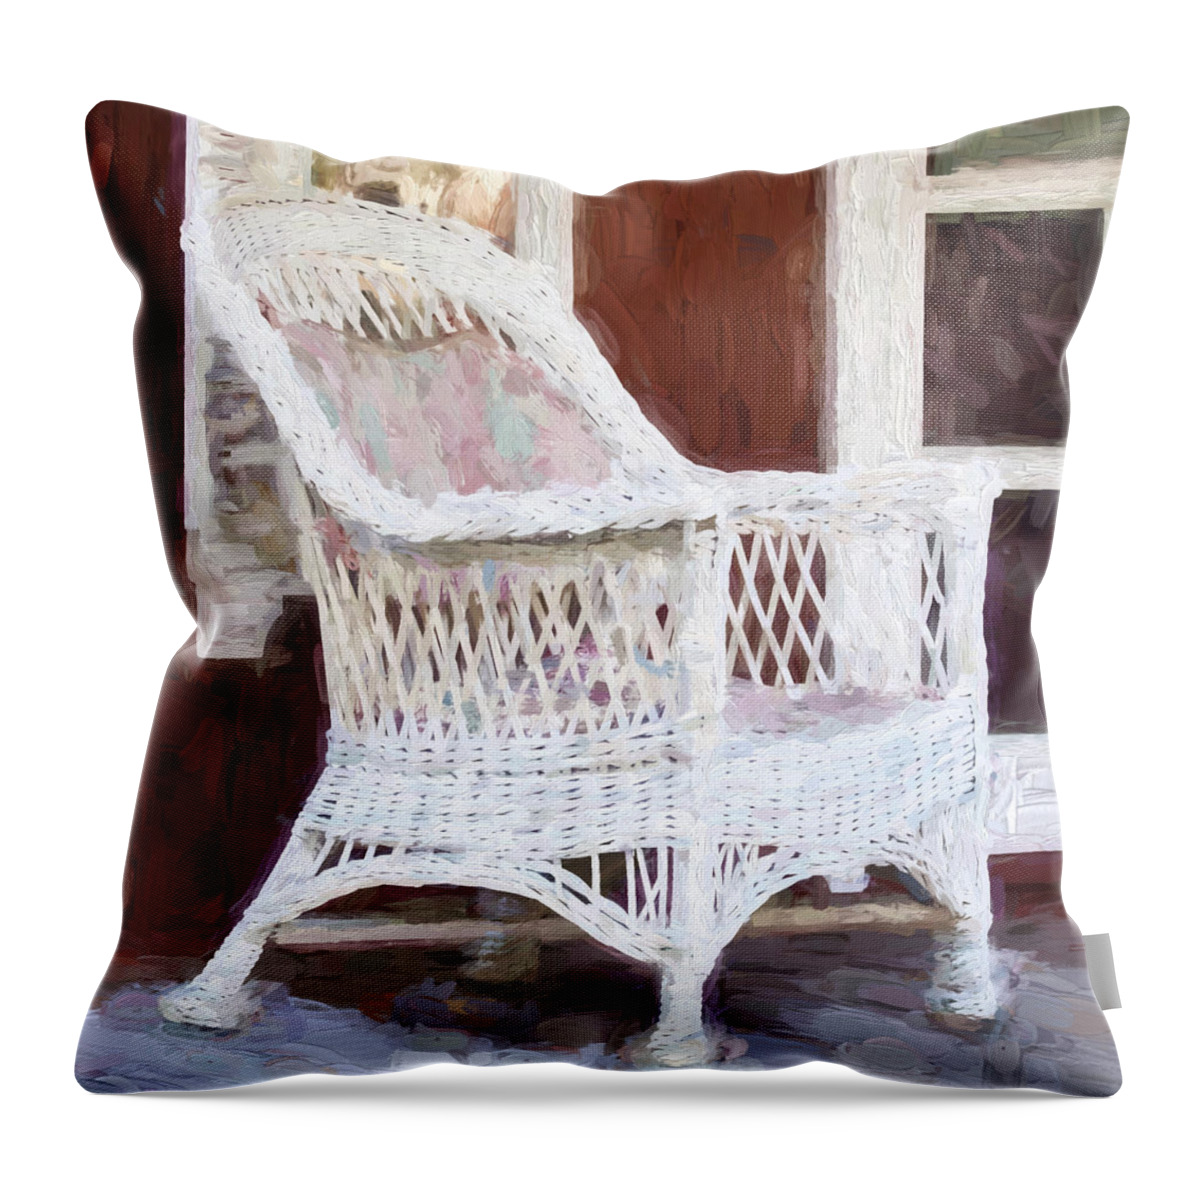 Porch Throw Pillow featuring the photograph Church Camp House Detail Painterly Series 15 by Carol Leigh